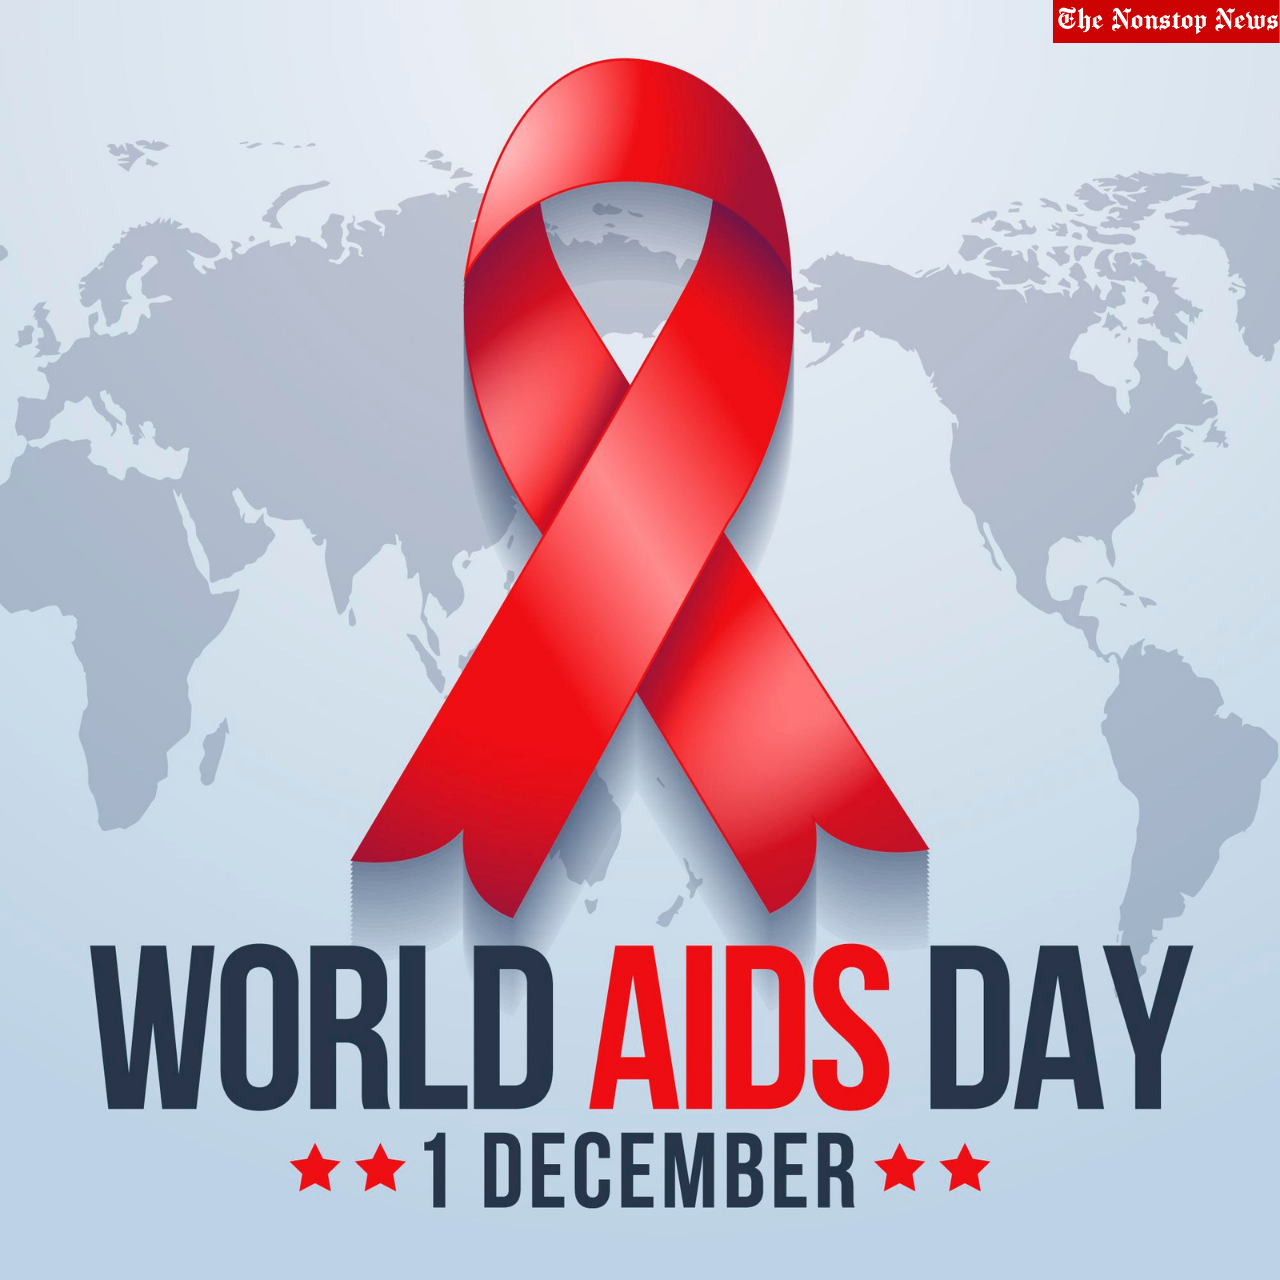 World AIDS Day 2021 Quotes, Poster, HD Images, Slogans, Messages, Instagram Captions, and Social Media Posts to Create Awareness